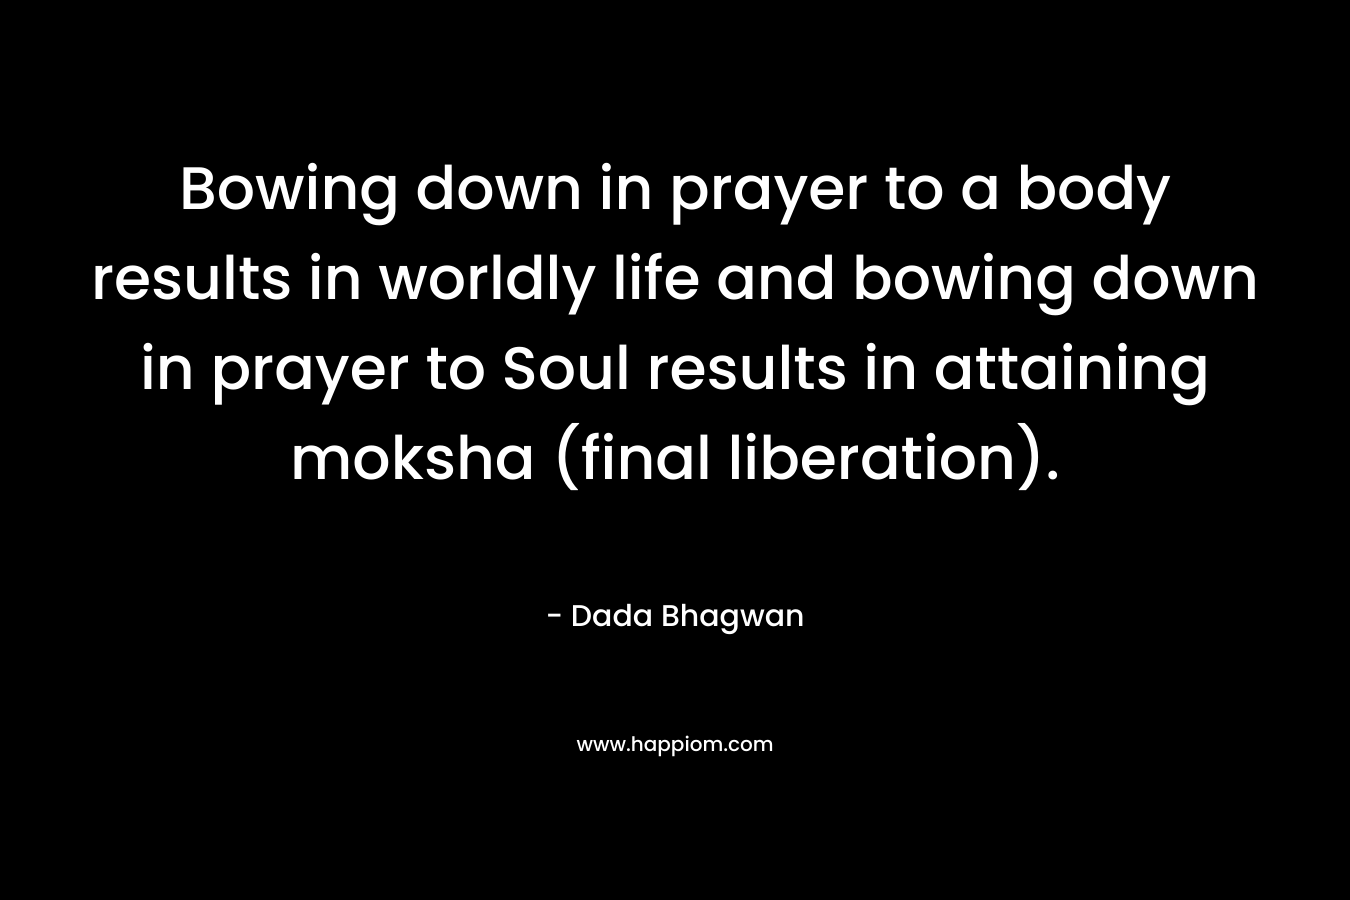 Bowing down in prayer to a body results in worldly life and bowing down in prayer to Soul results in attaining moksha (final liberation).